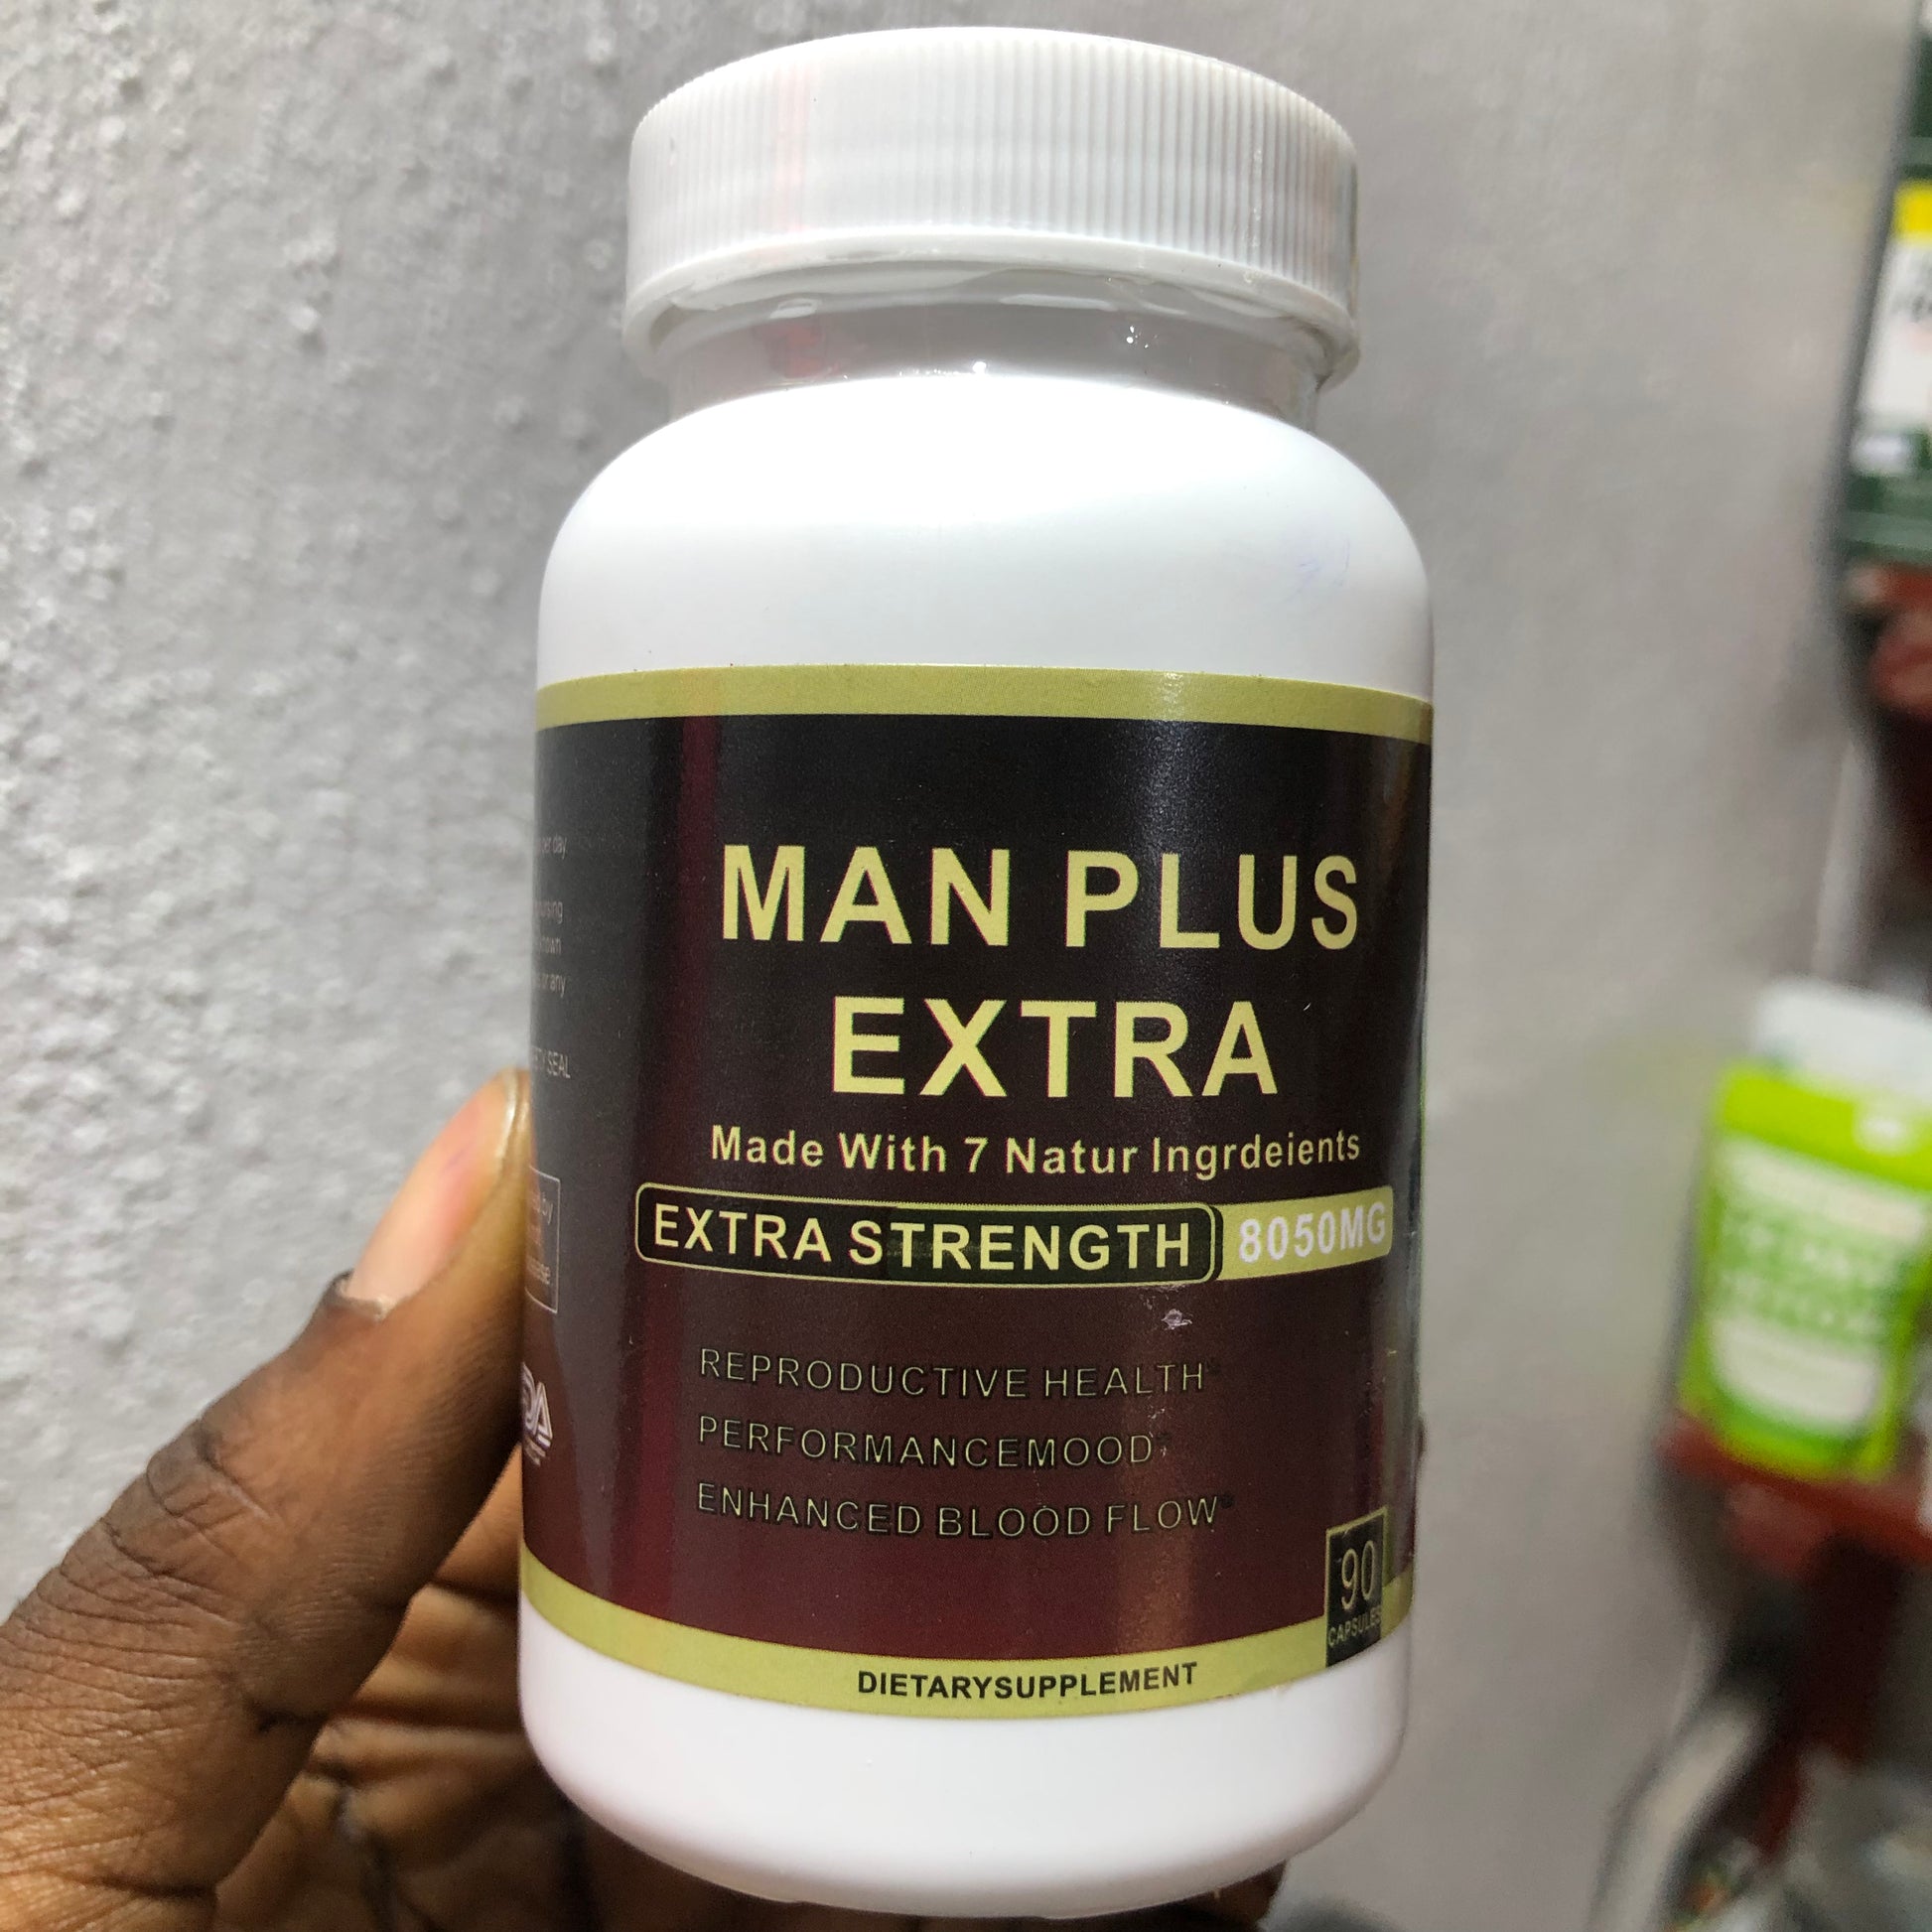 Man Plus Extra Capsules with Maca Root and 6 Natural Ingredients (90 capsules, 8050mg) | Dietary Supplement for Energy, Stamina, Fertility, Mood, and Erection